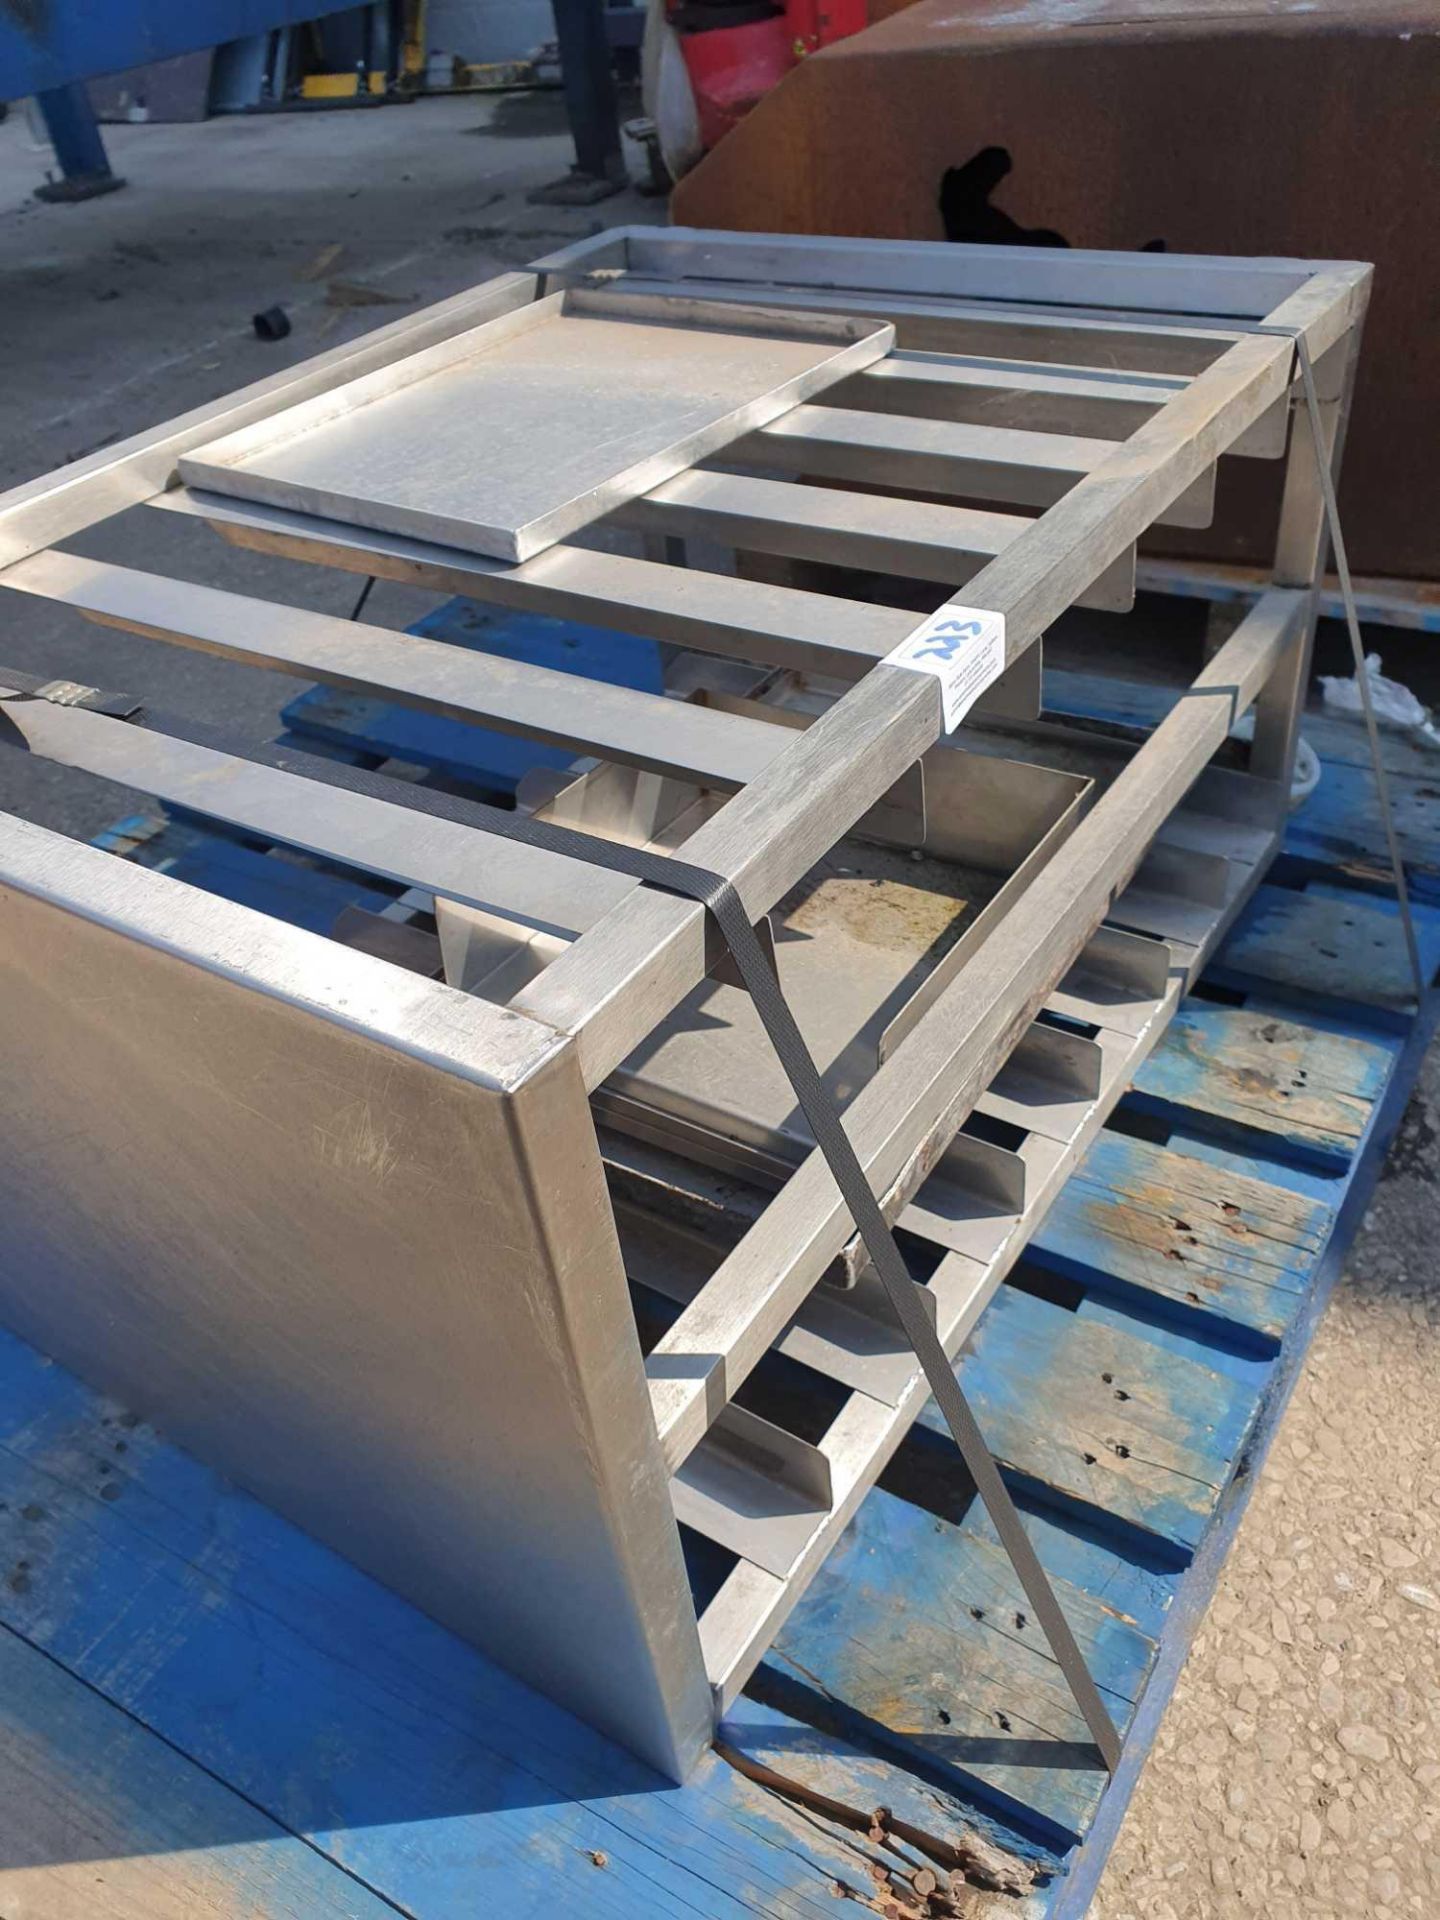 Stainless steel catering trolley - Image 3 of 4